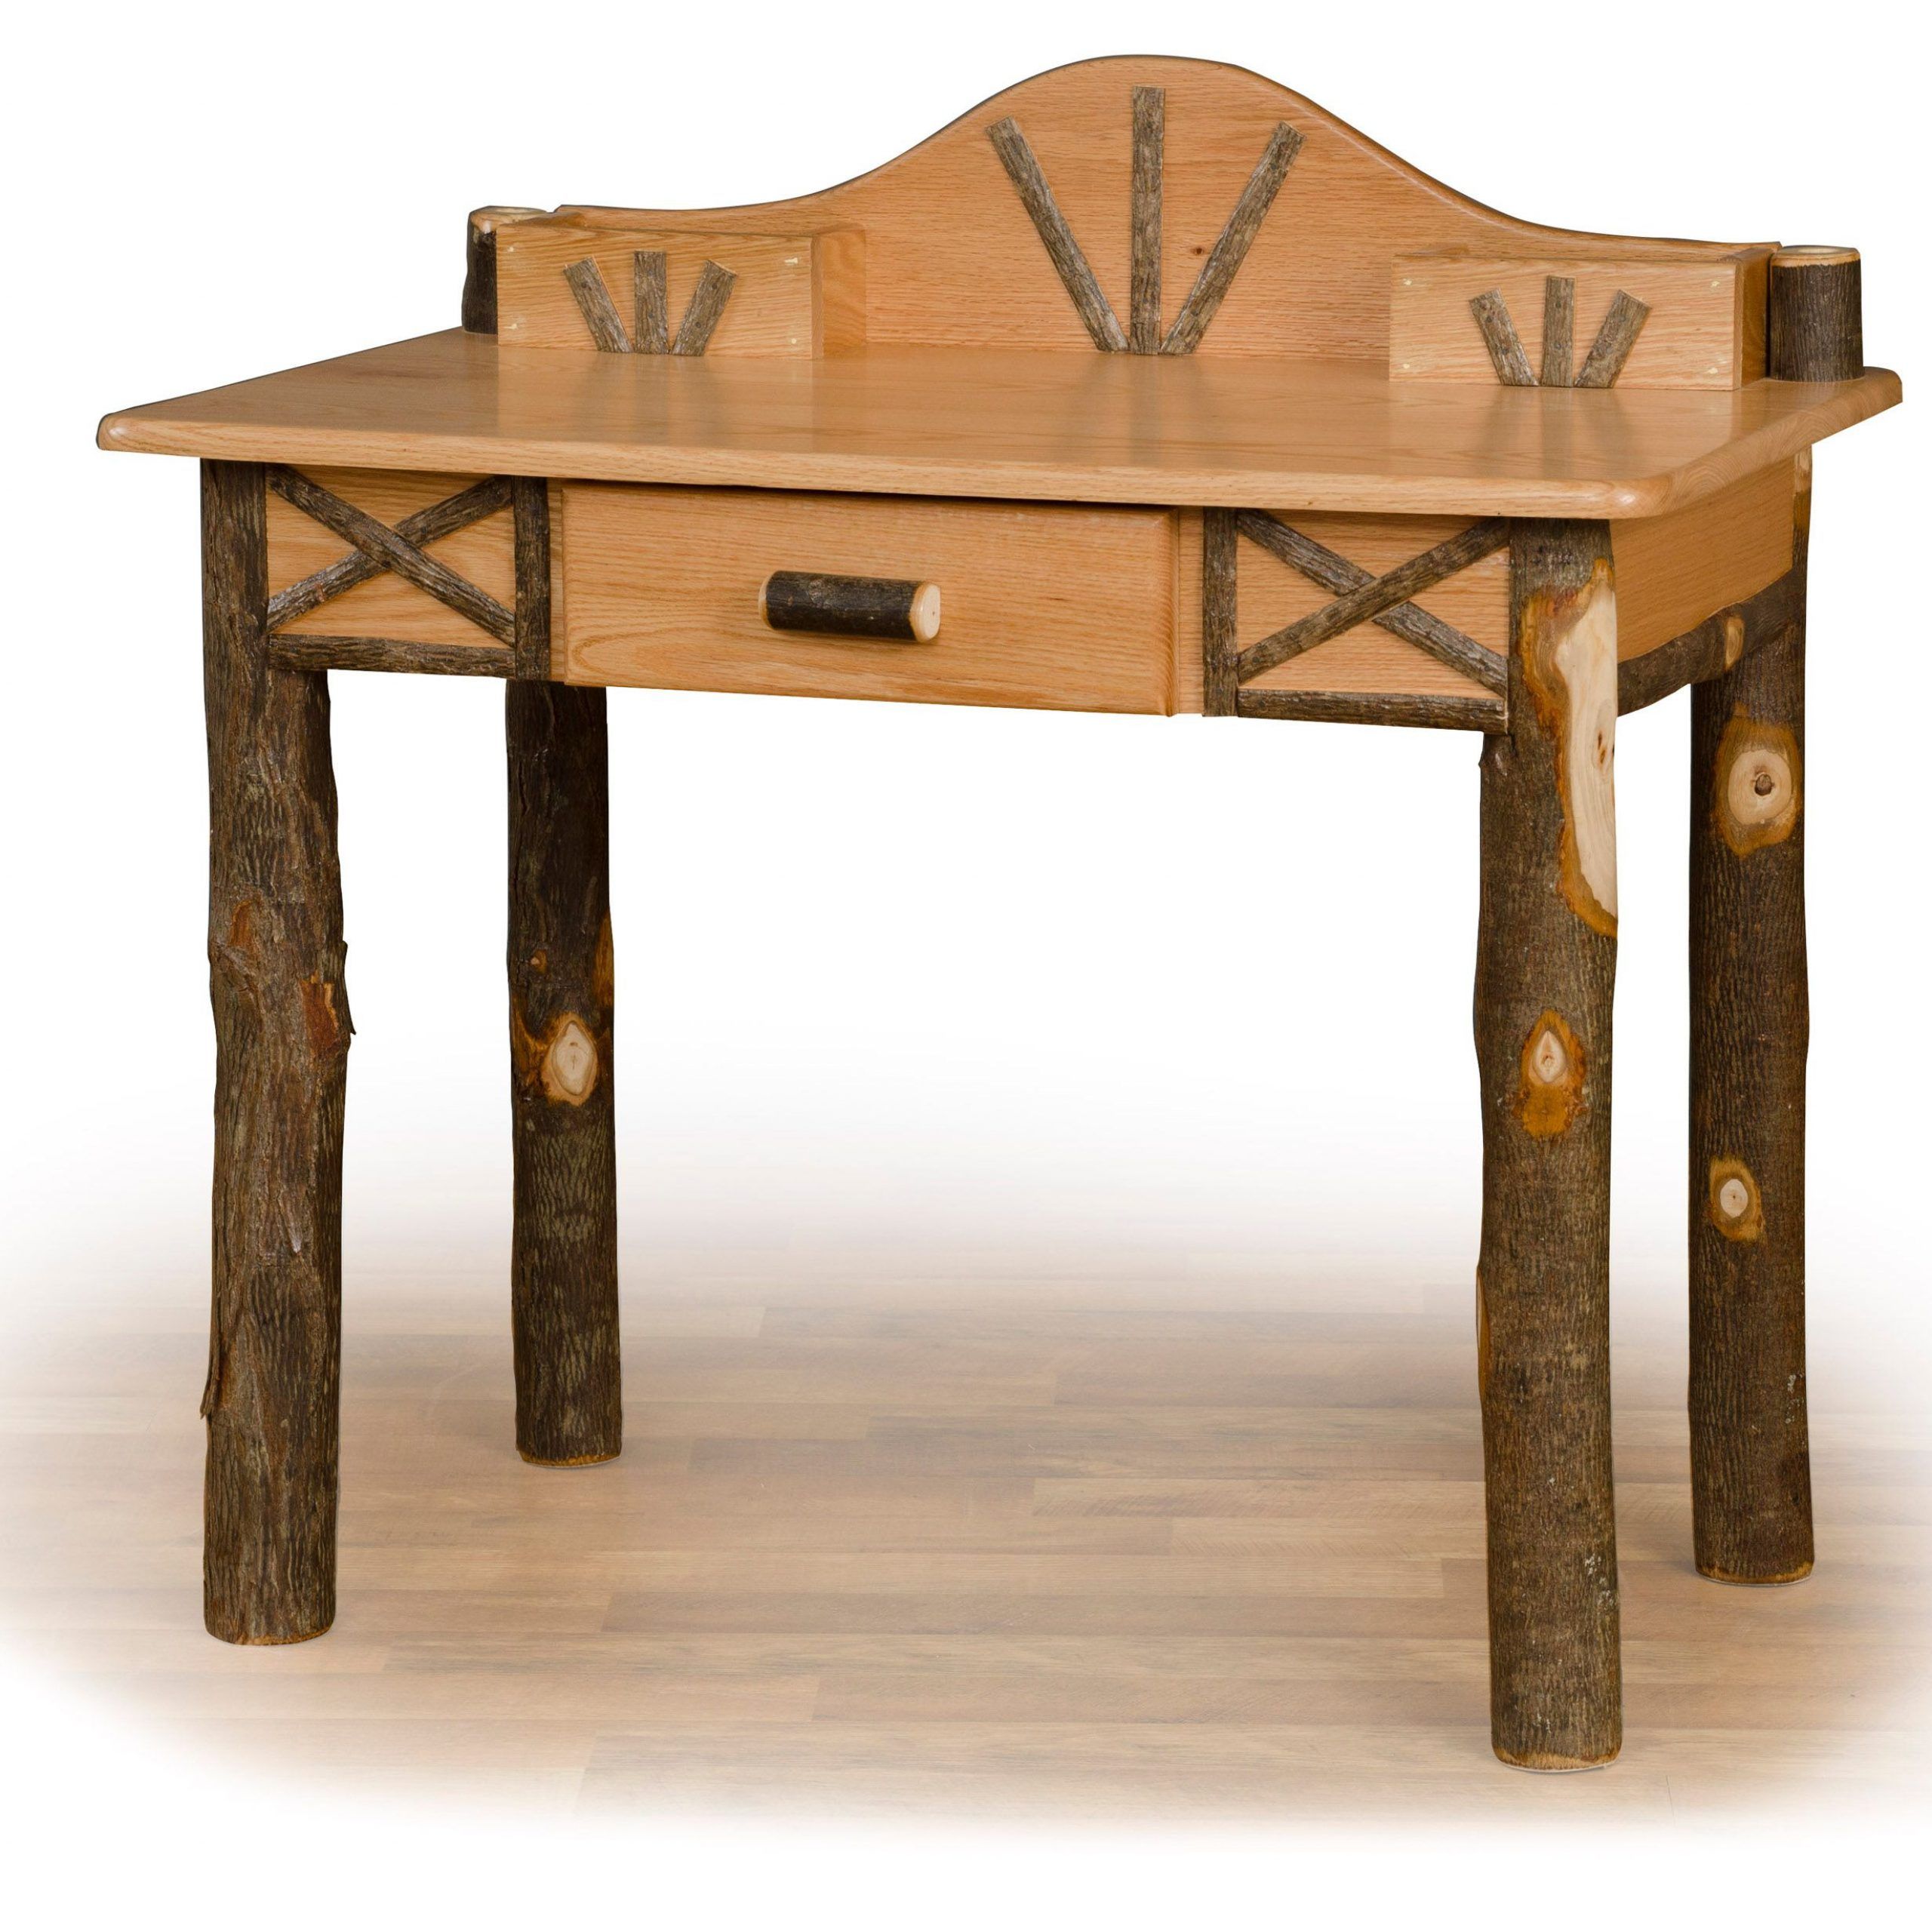 Rustic Hickory, Rustic Furniture, Country Intended For Most Recent Rustic Acacia Wooden Writing Desks (View 3 of 15)